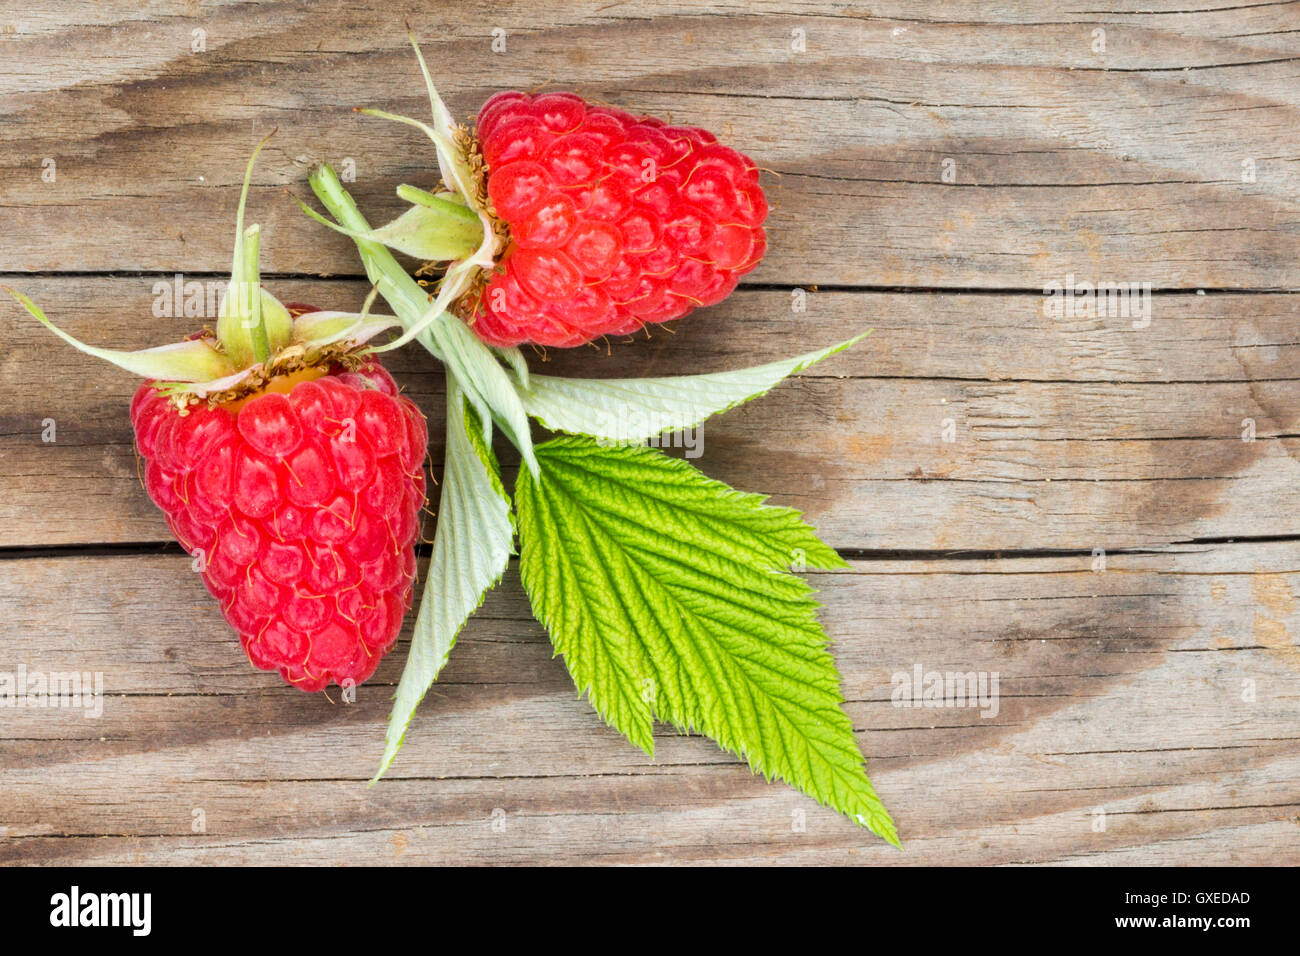 close-up of raspberries on a wooden background Stock Photo